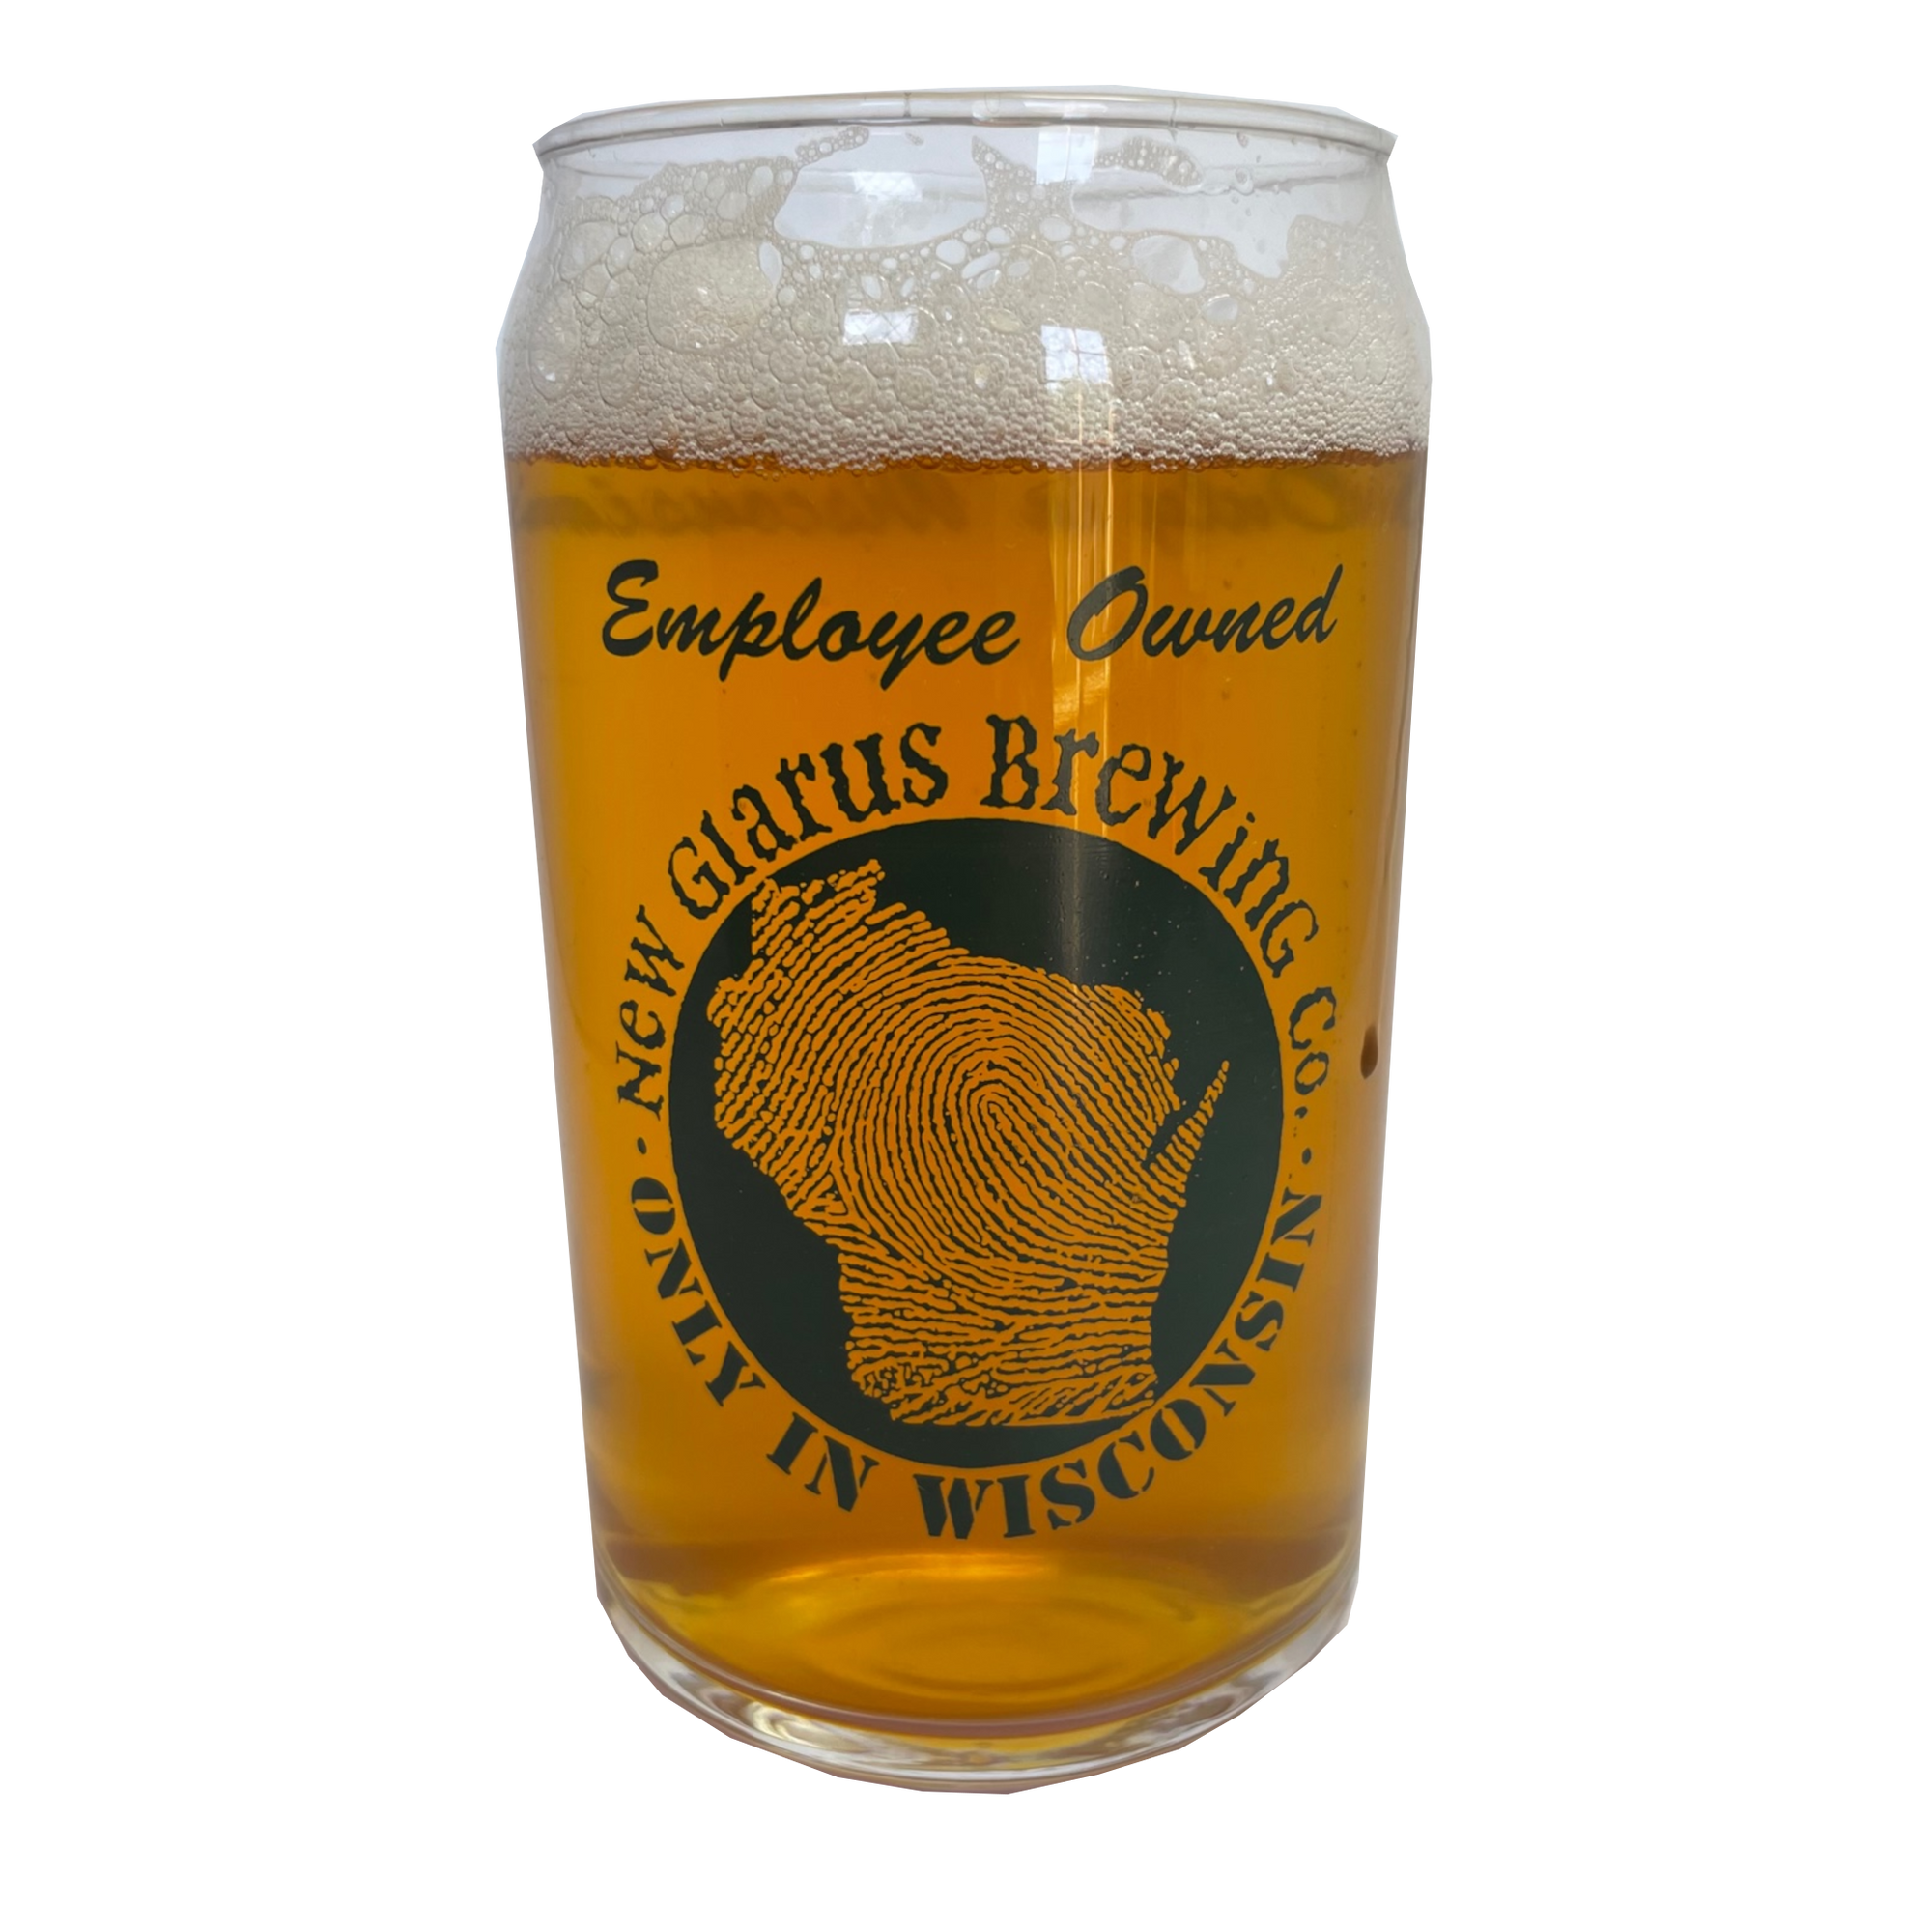 Can shaped glass with New Glarus Brewing Co. Only In Wisconsin circle logo and Employee Owned printed on the glass in dark green.